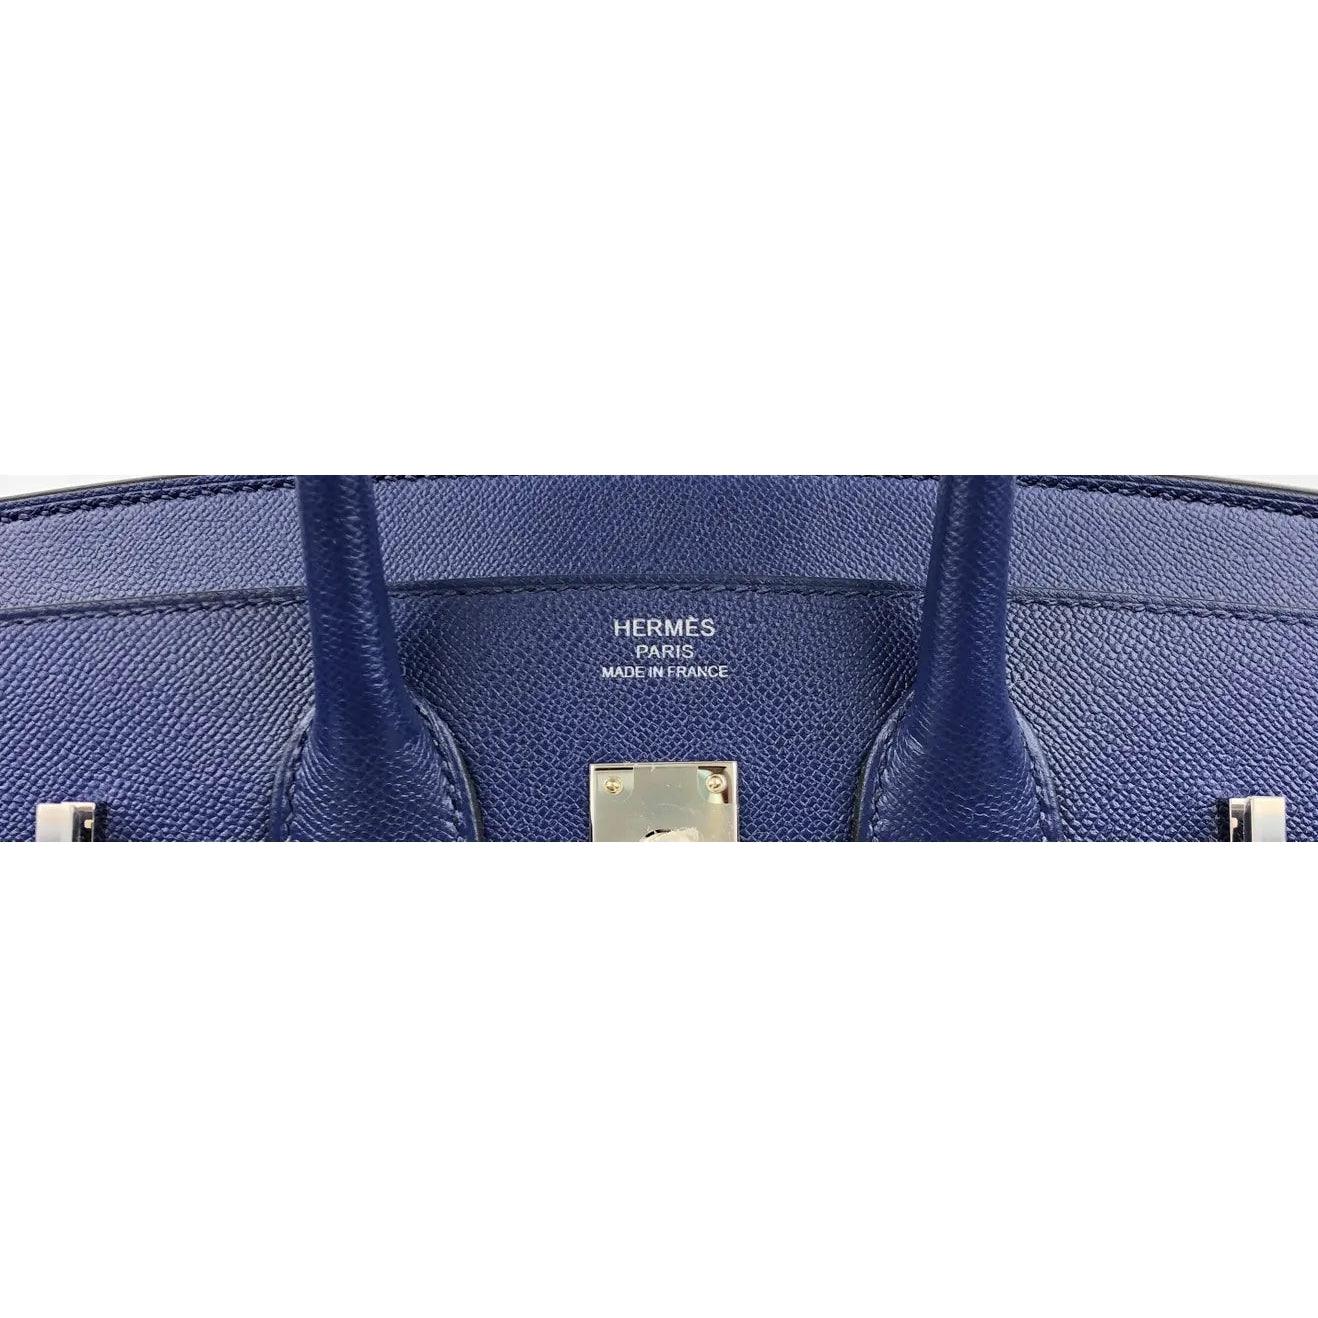 Sold at Auction: Hermes Birkin 25 Bag, Blue Sapphire Swift Leather